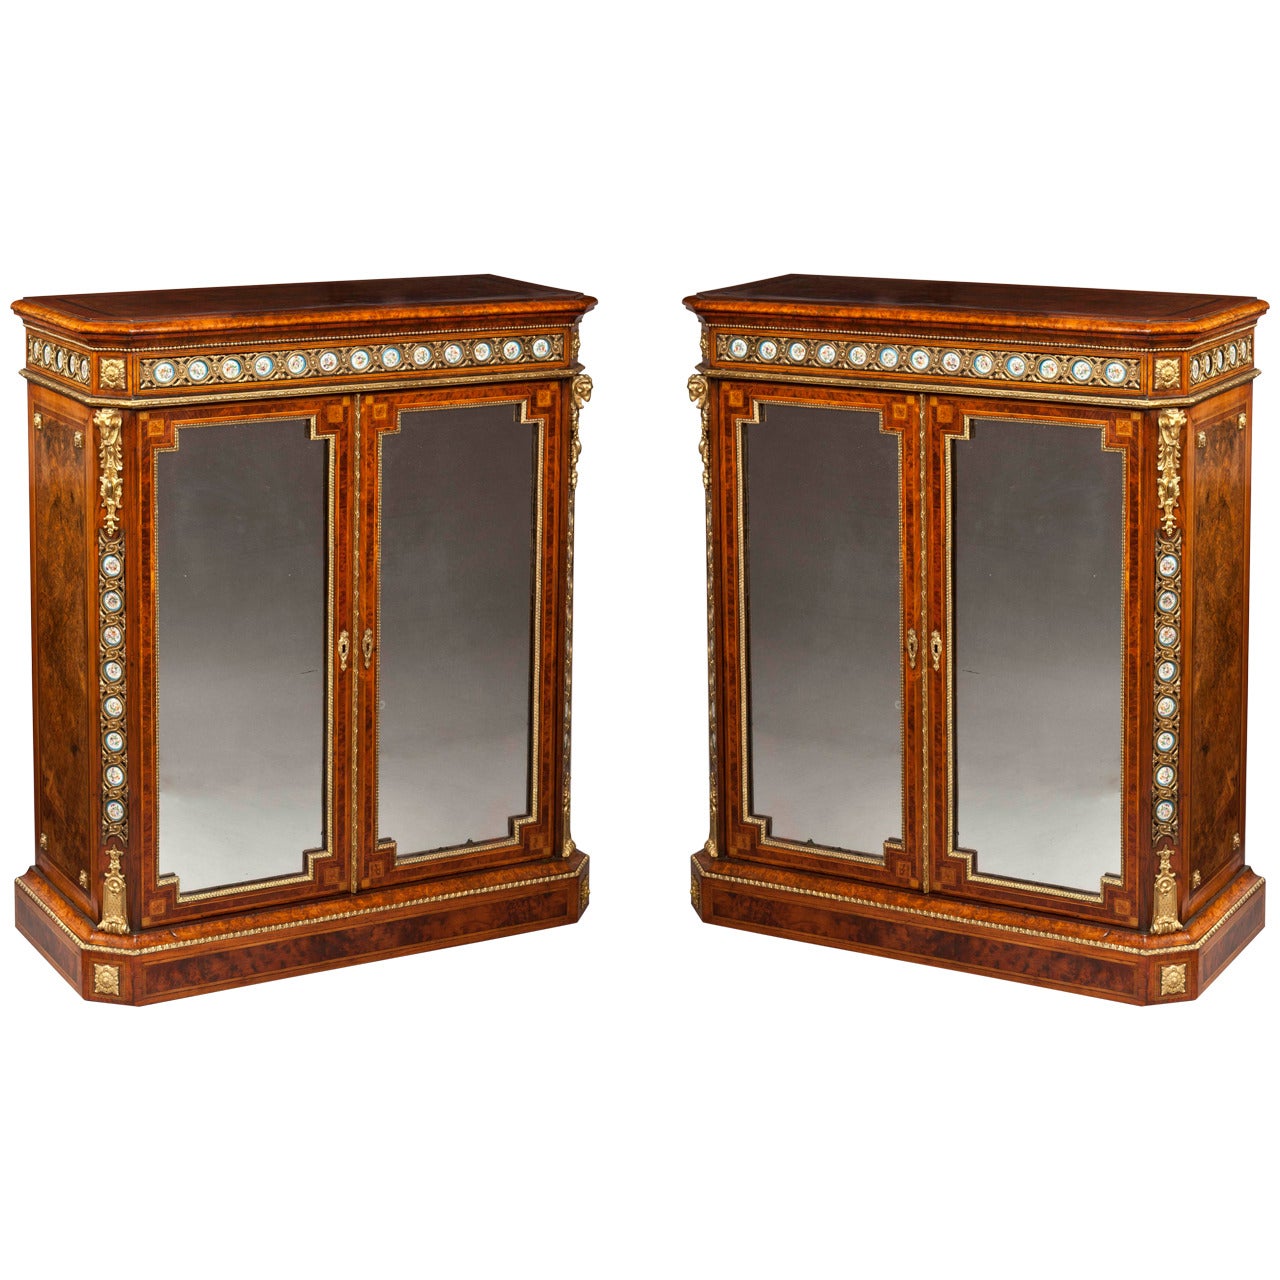 Pair of English Side Cabinets with Mirrored Doors and Inset Floral Porcelain